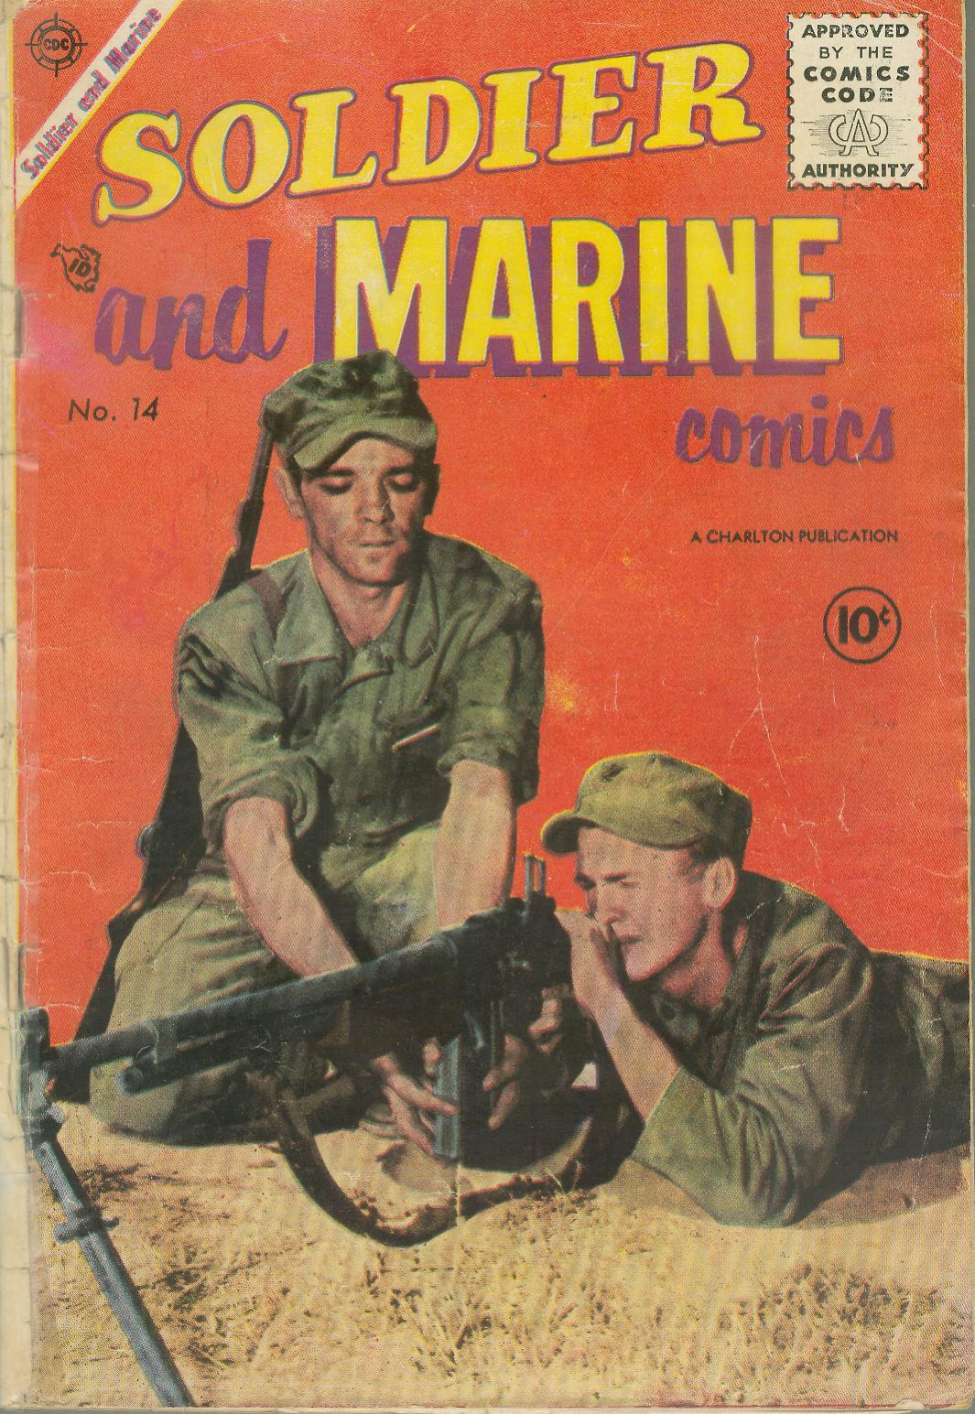 Book Cover For Soldier and Marine Comics 14 - Version 1